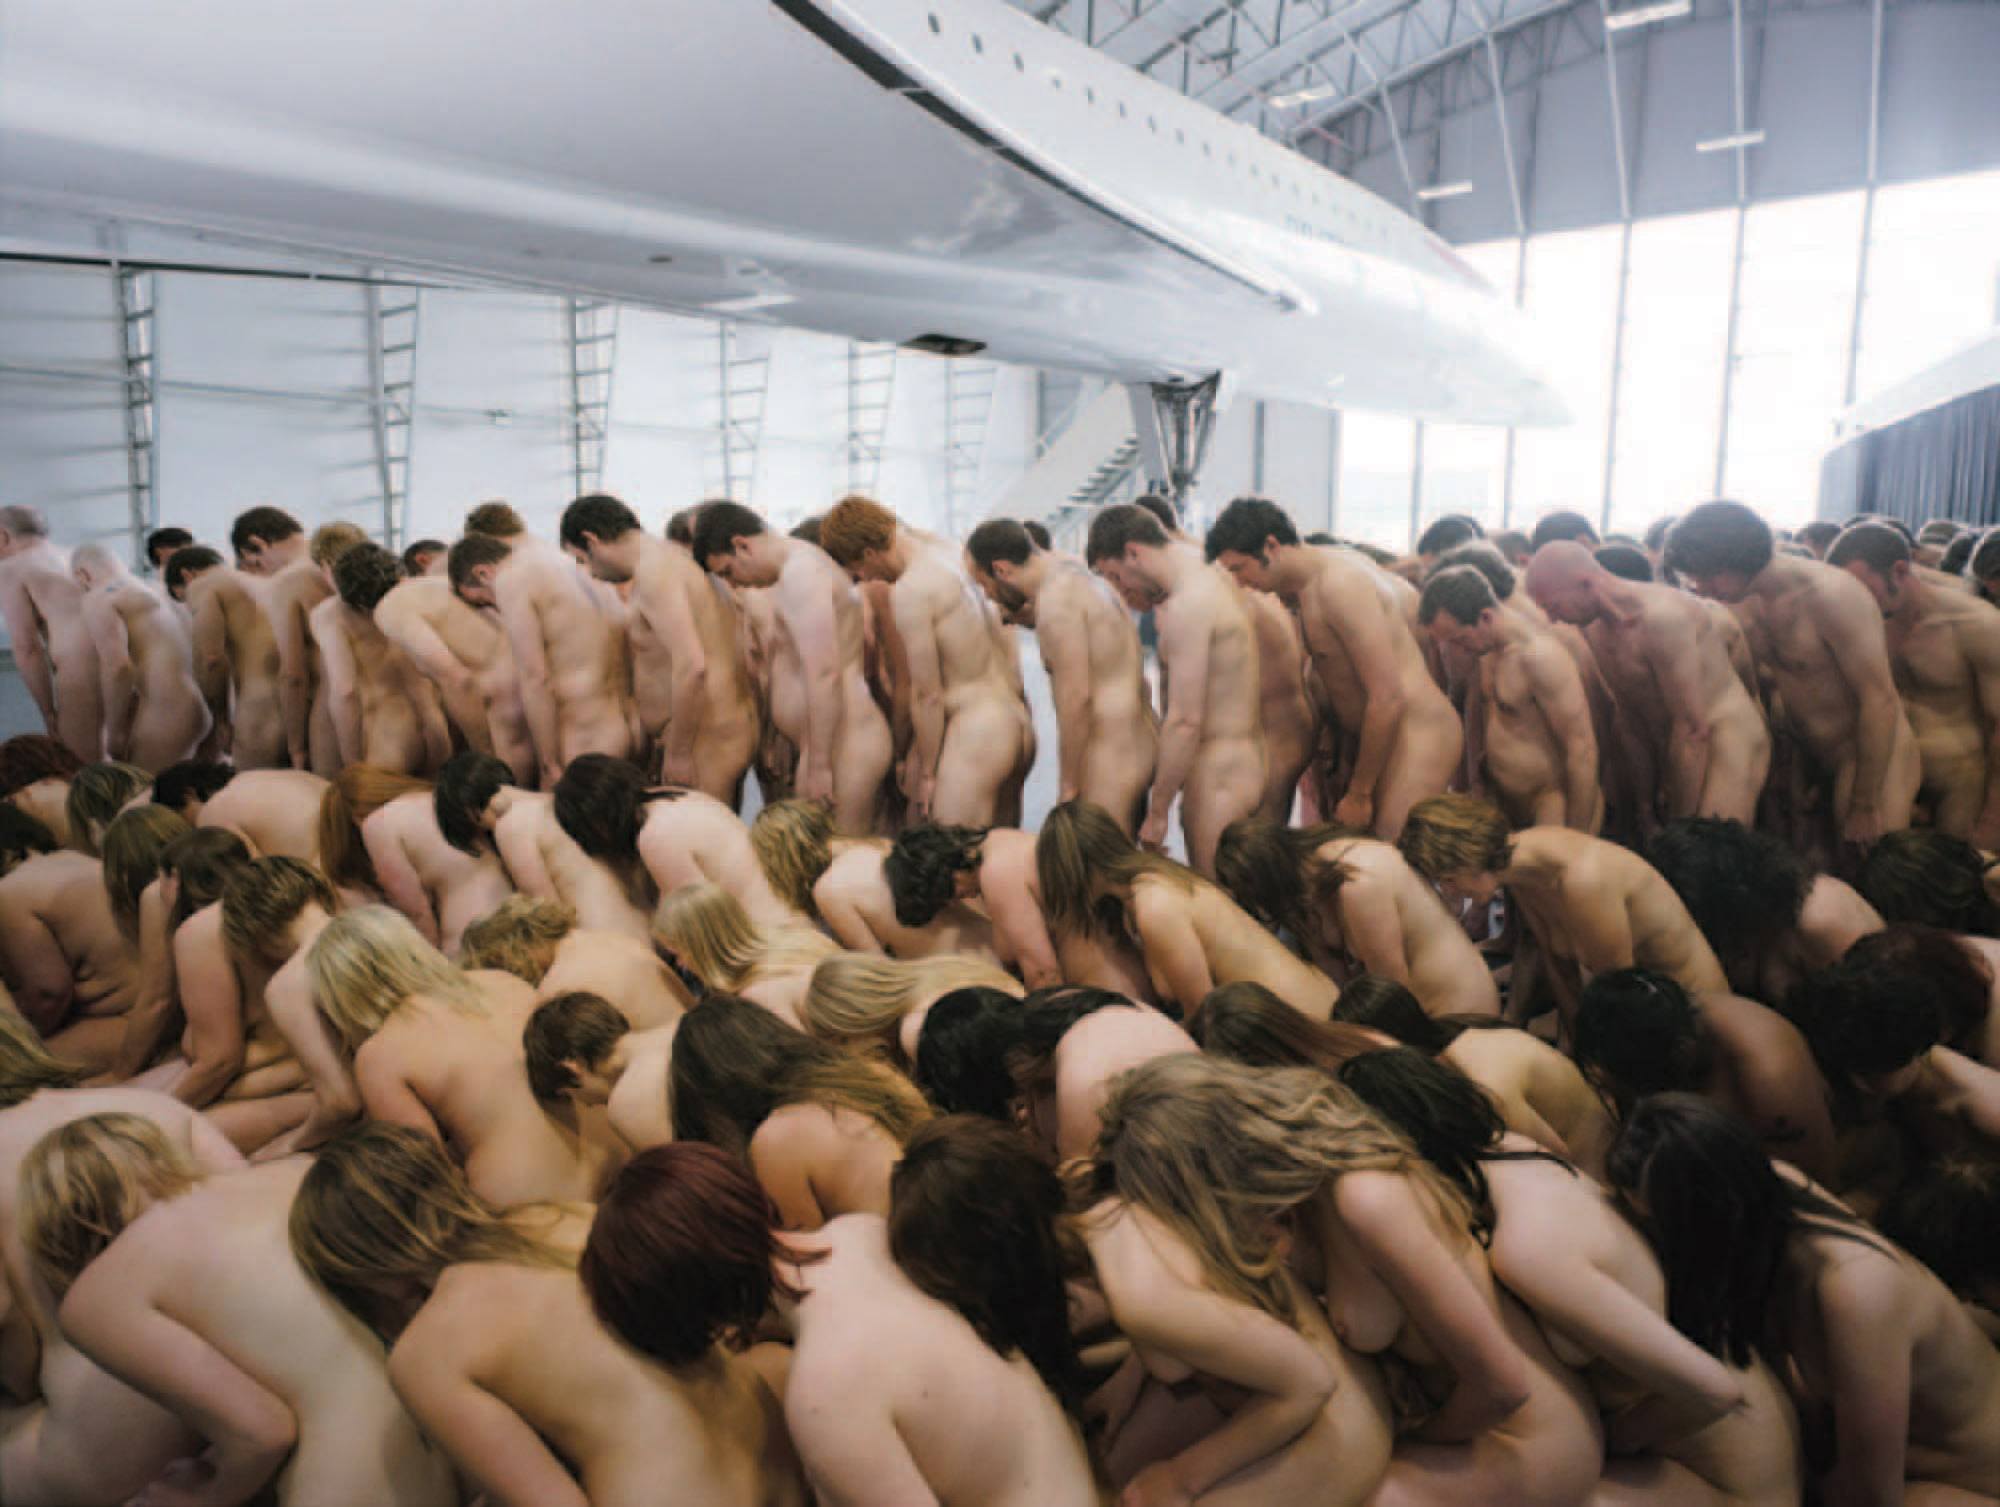 is best known for organizing large-scale nude shoots. 